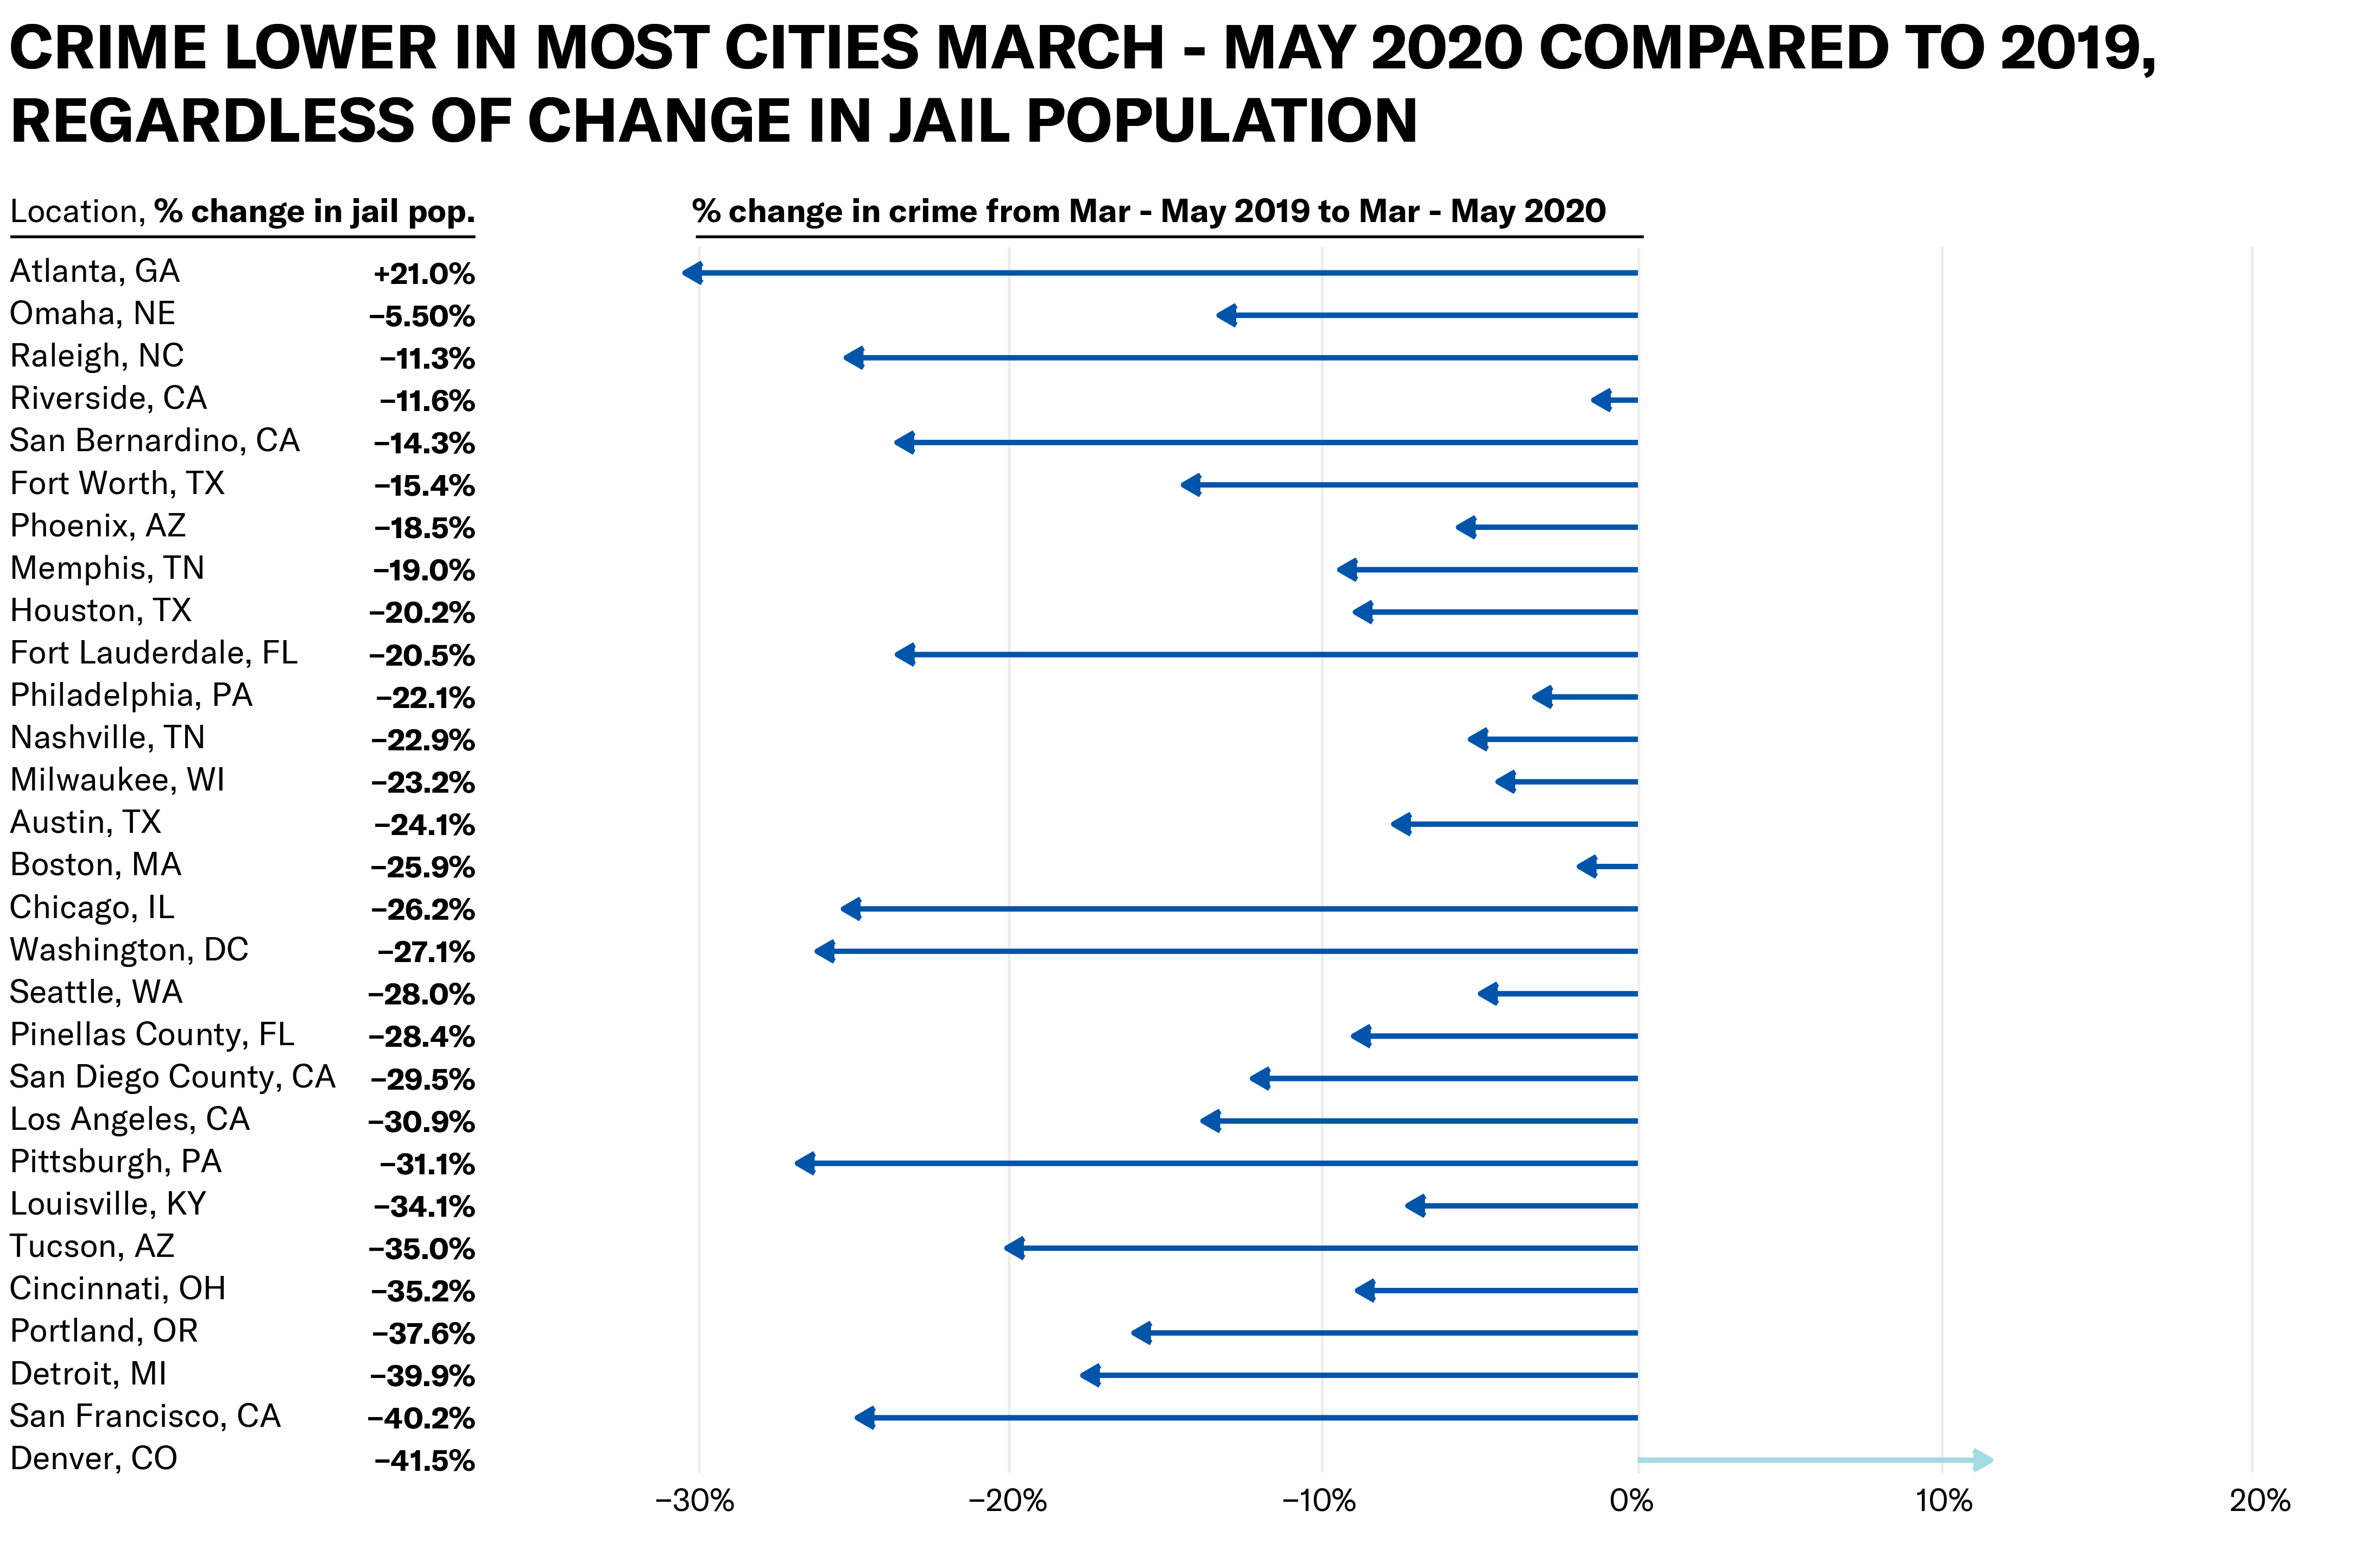 Chart indicating that crime was lower in most cities march - May 2020 compared to 2019, regardless of change in jail population.